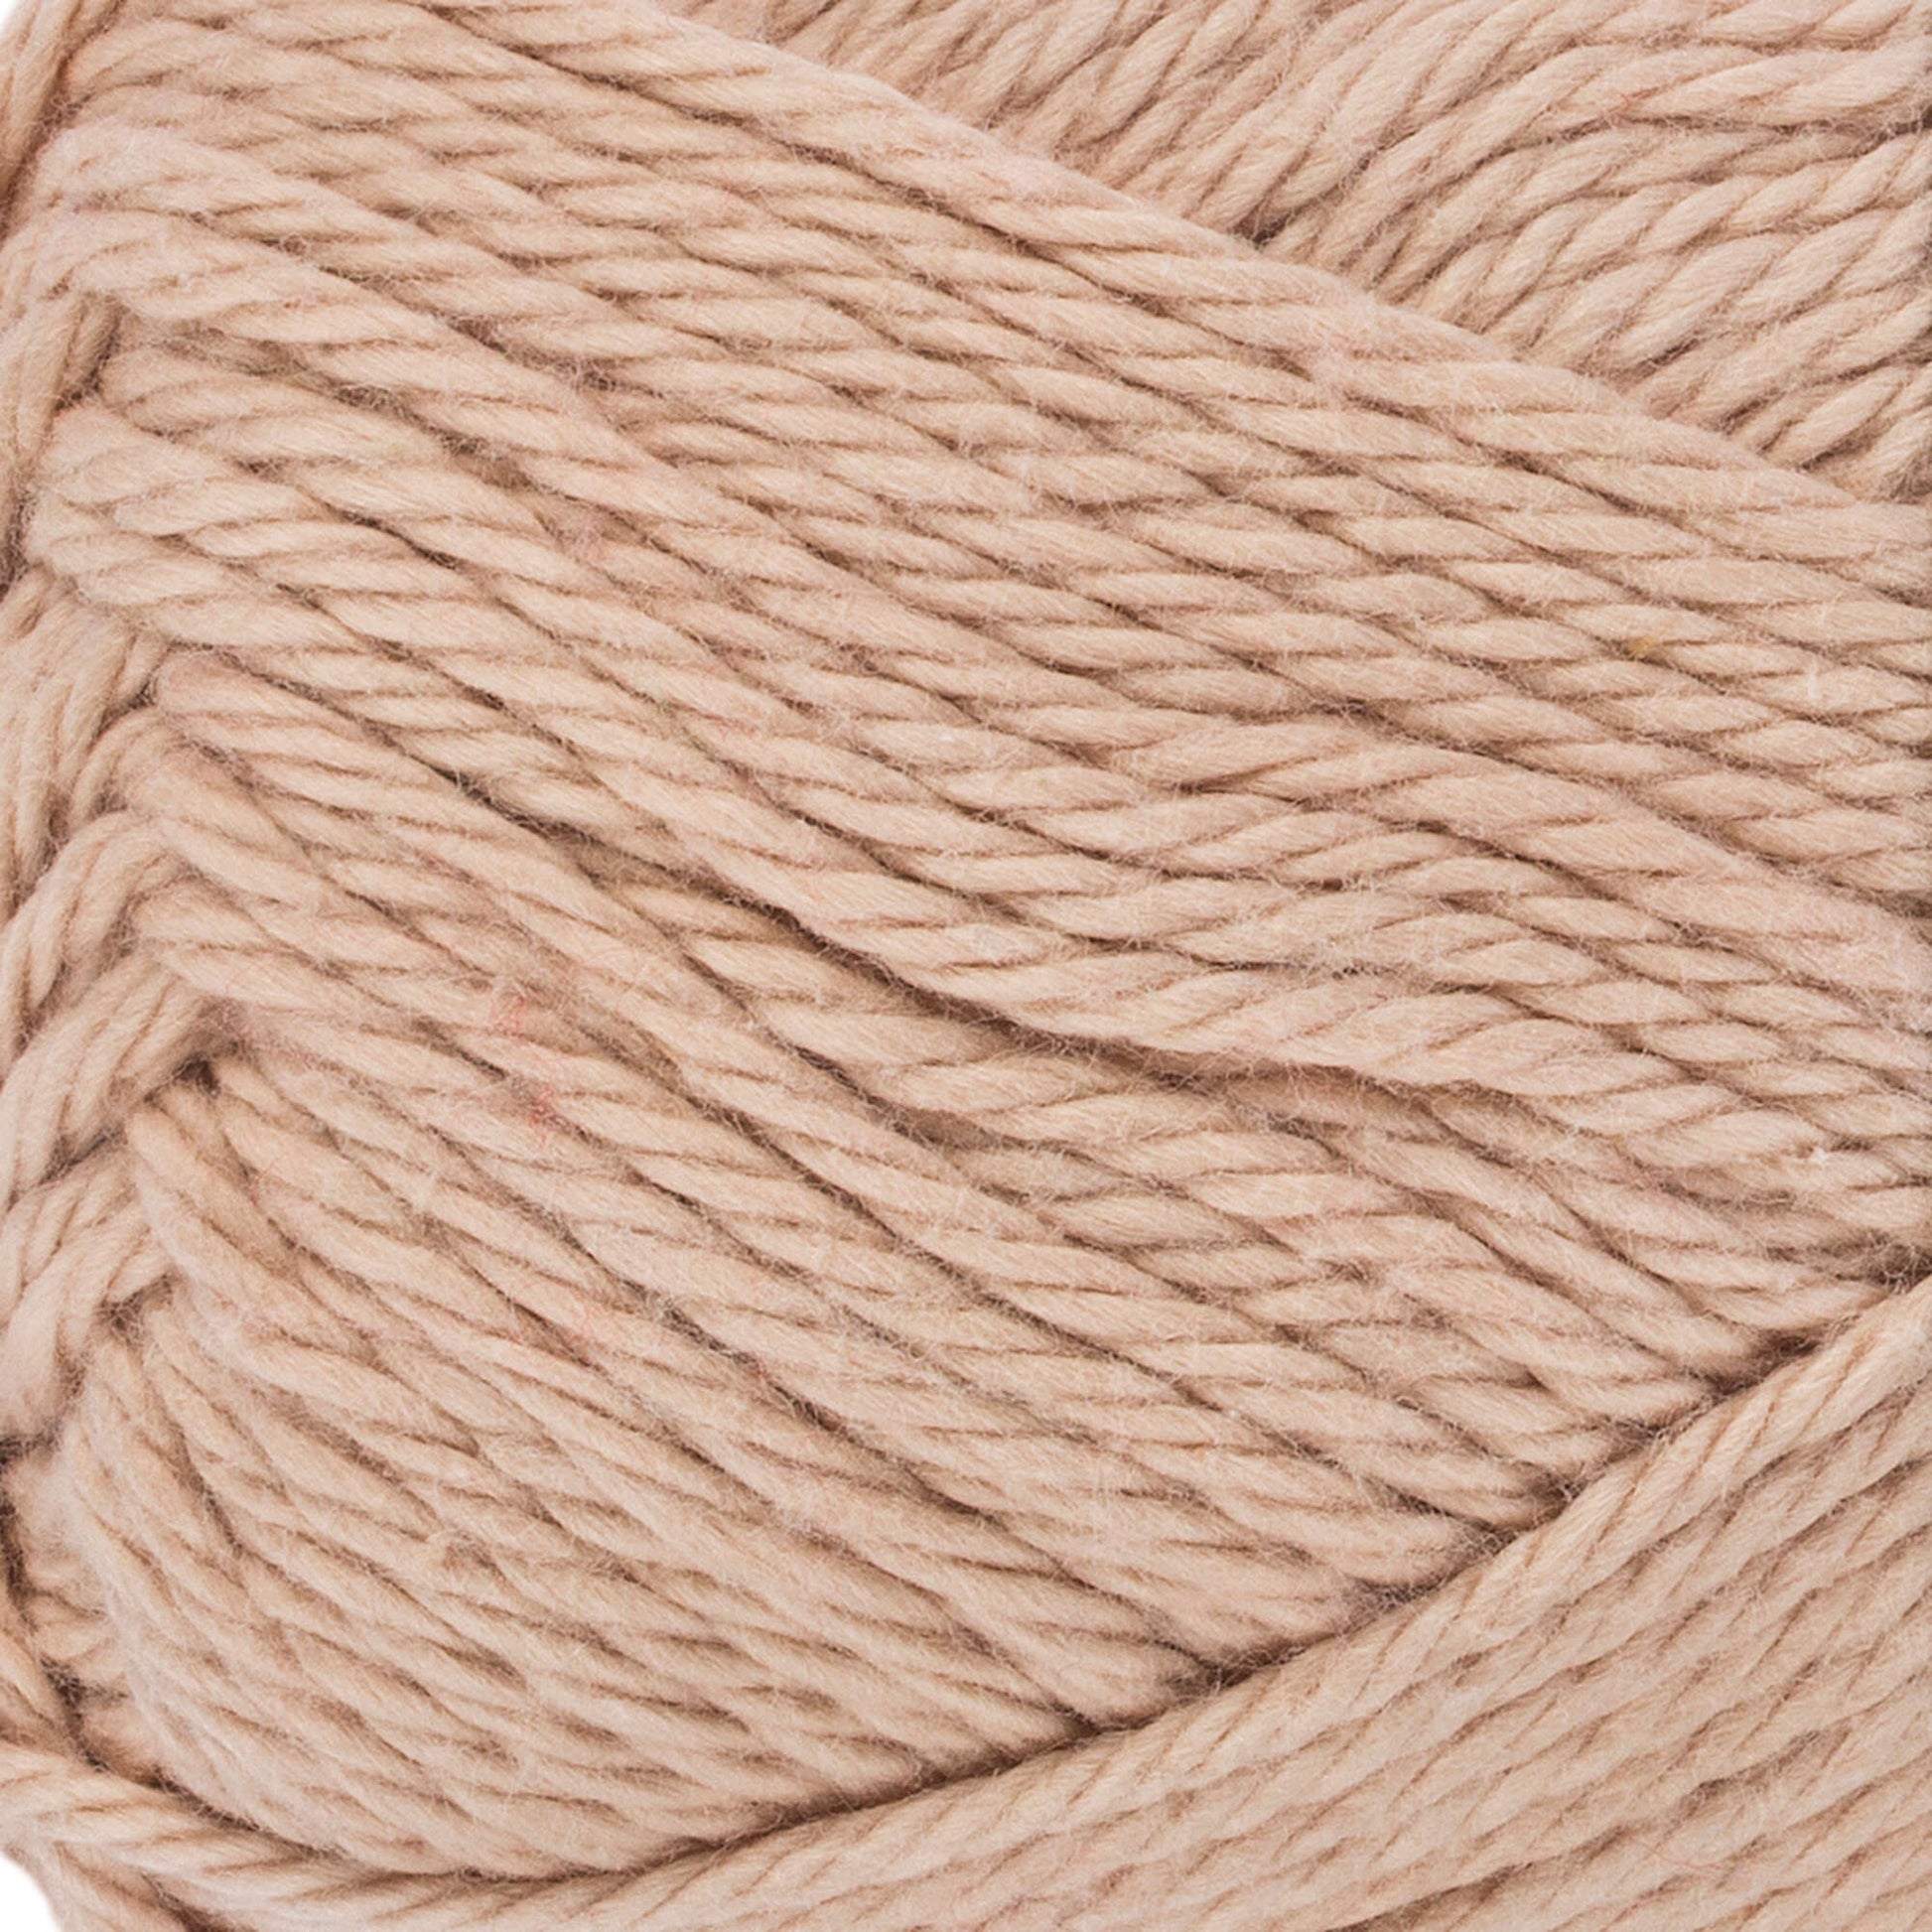 Red Heart Scrubby Smoothie Yarn - Clearance shades Tan